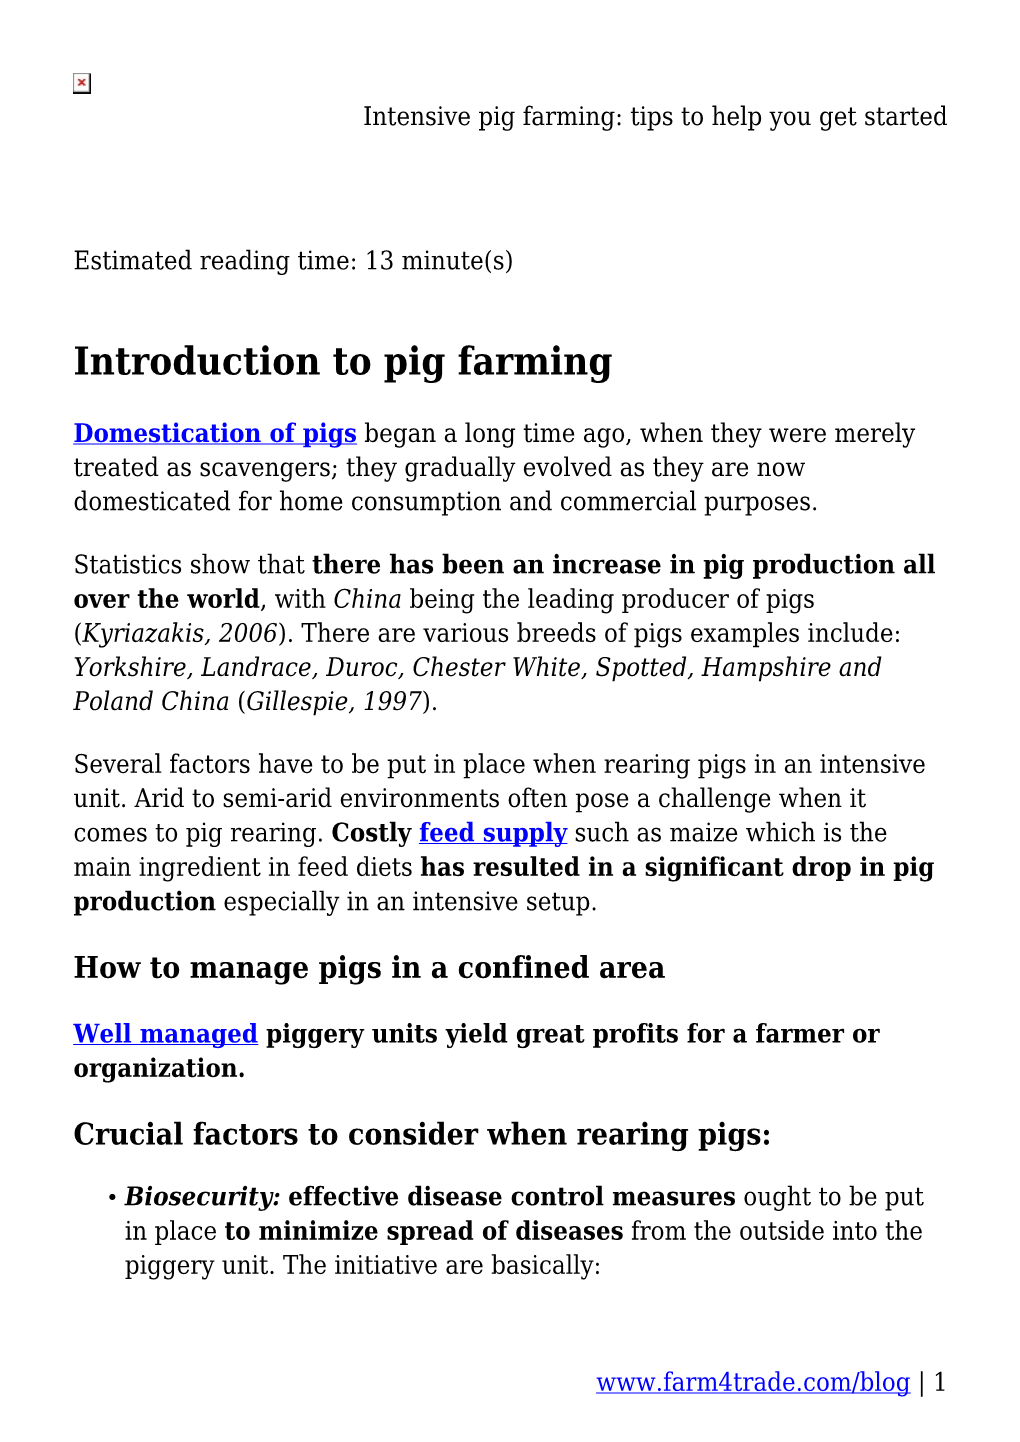 Intensive Pig Farming: Tips to Help You Get Started